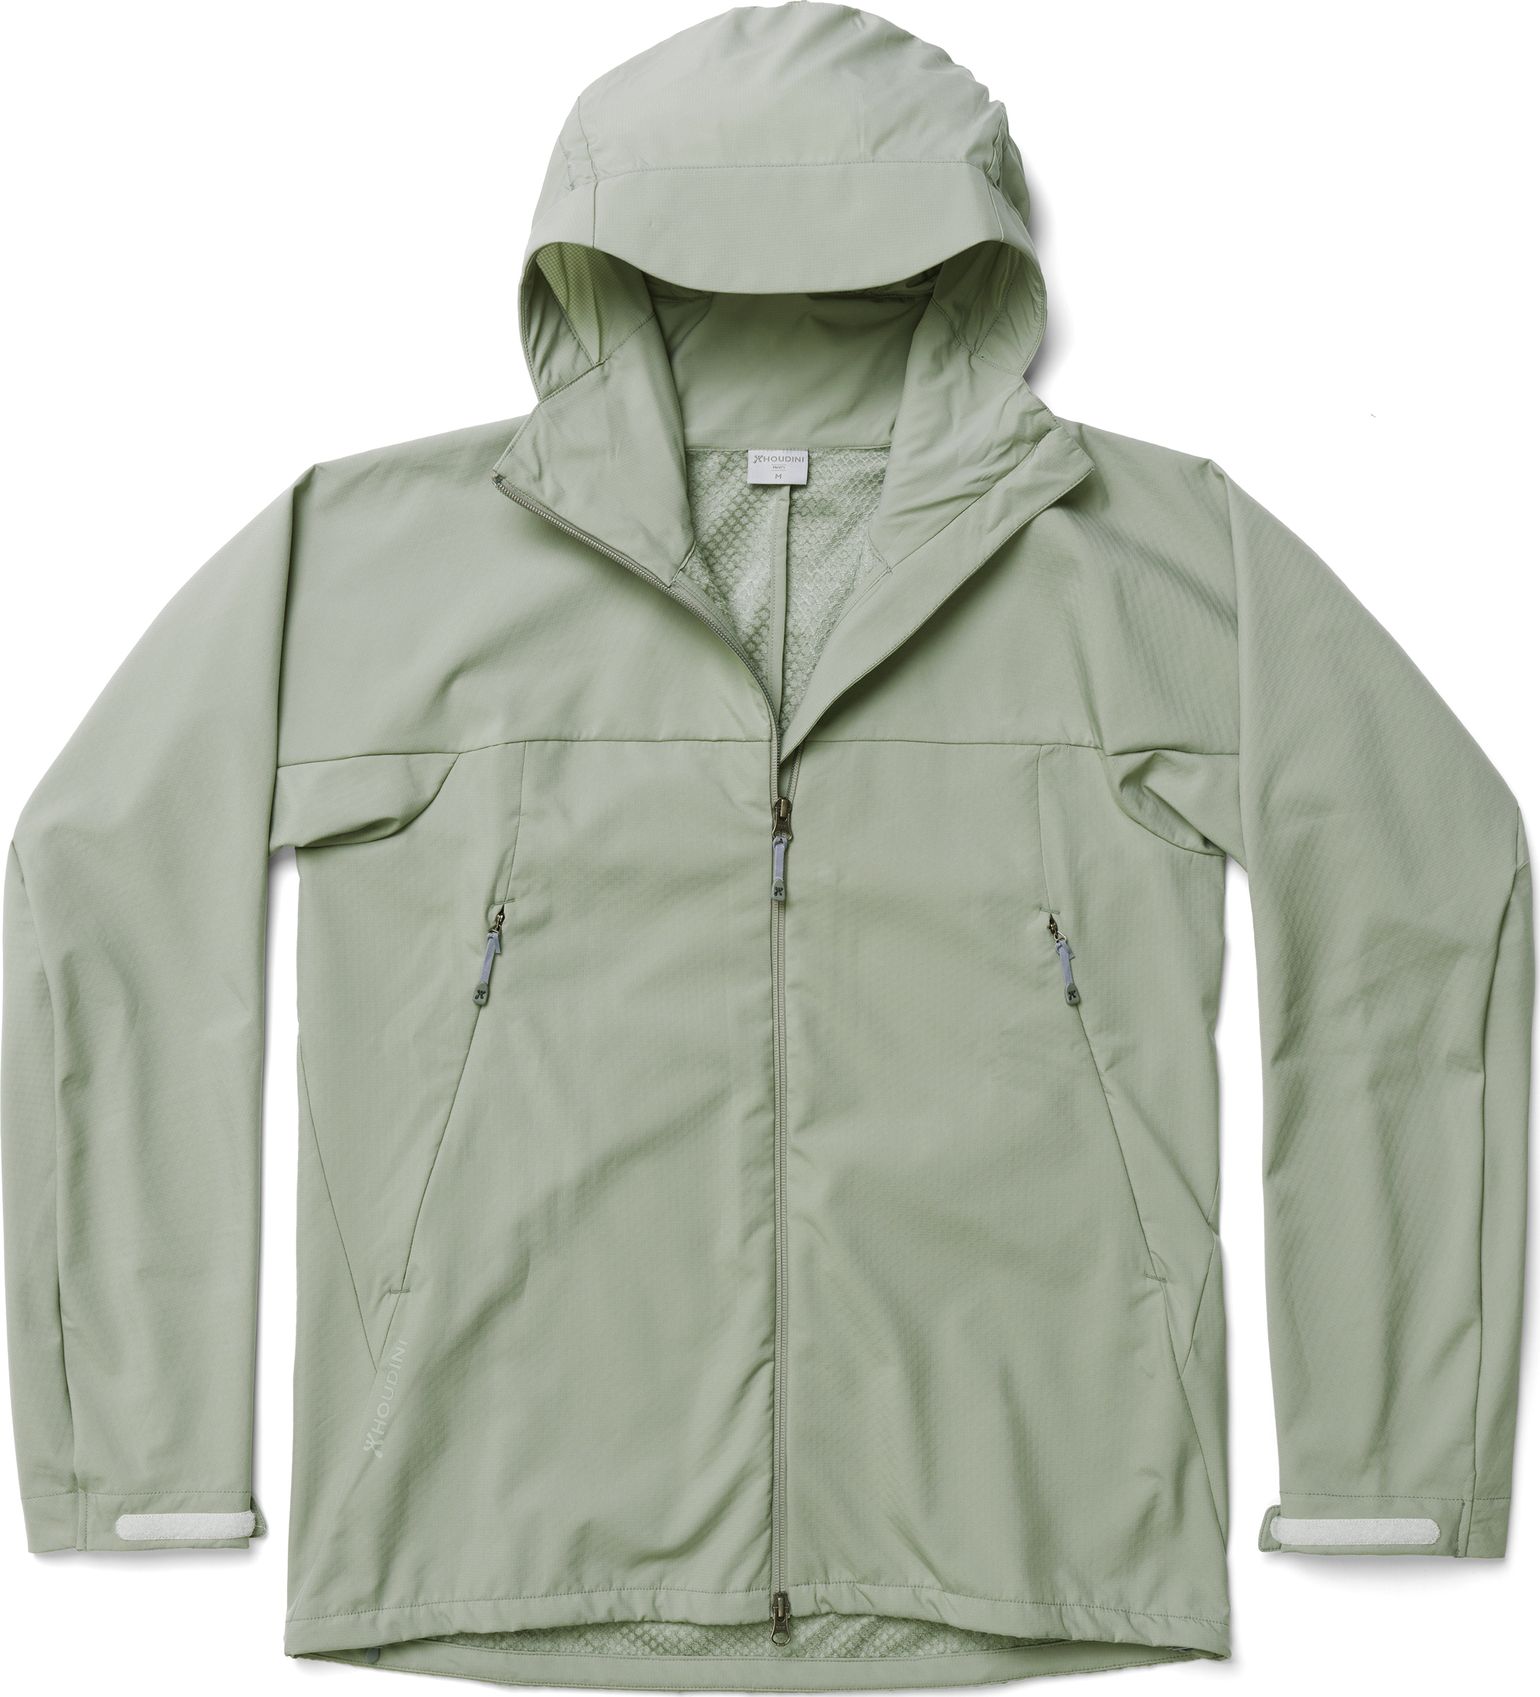 Houdini Men's Pace Jacket Frost Green